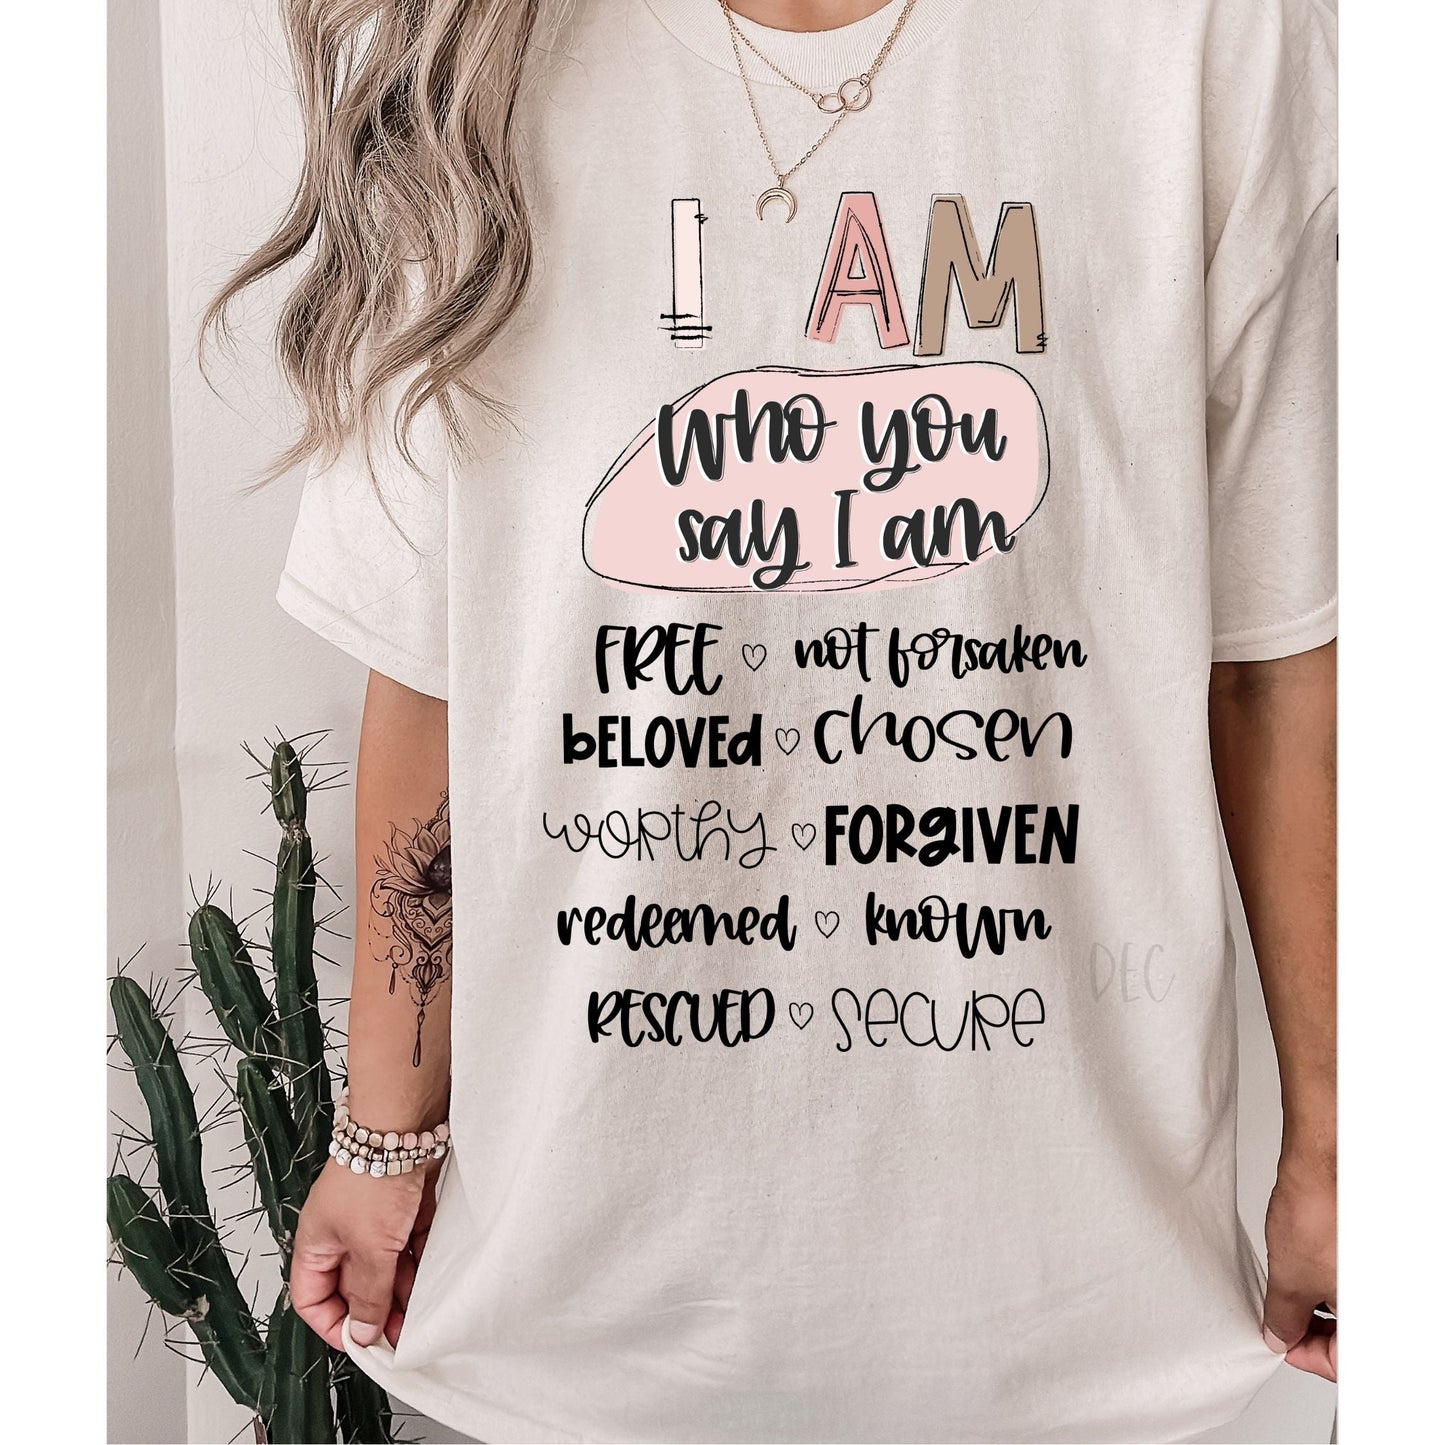 I am who you say I am-Comfort Color-Tee